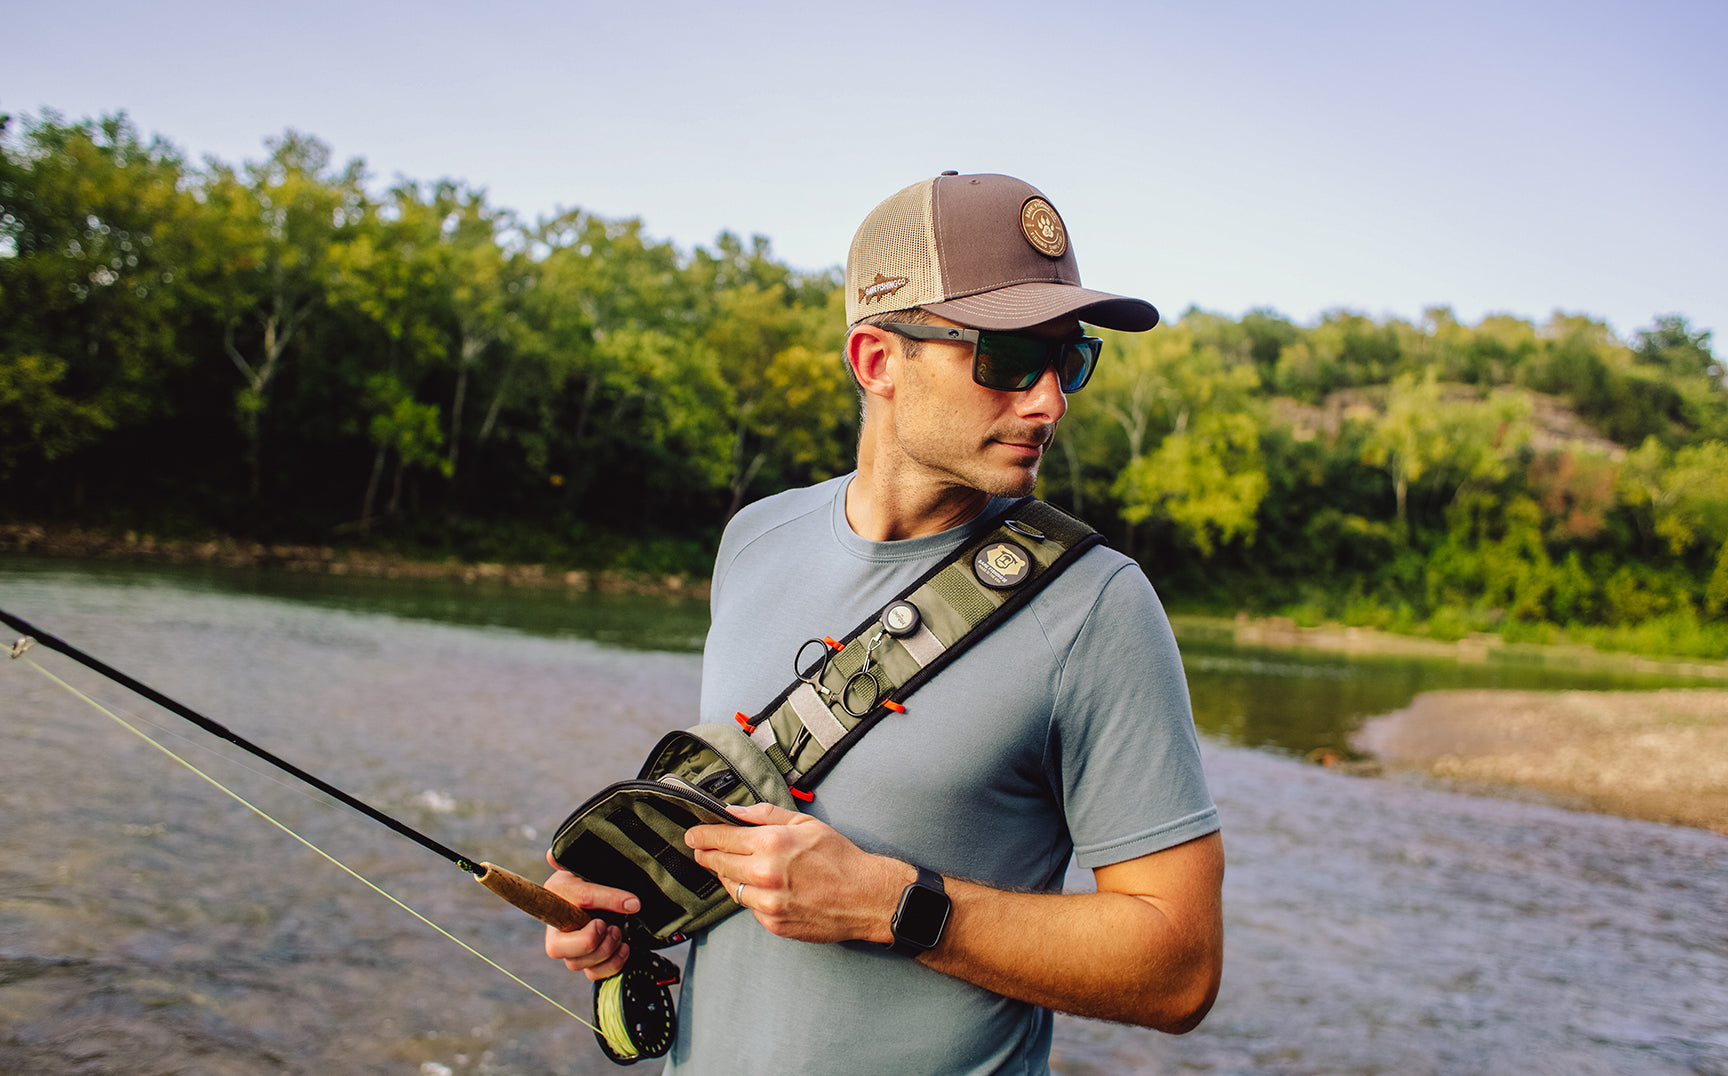 Bare Fishing Co. - Fly Fishing Slings and Packs - Made in the USA